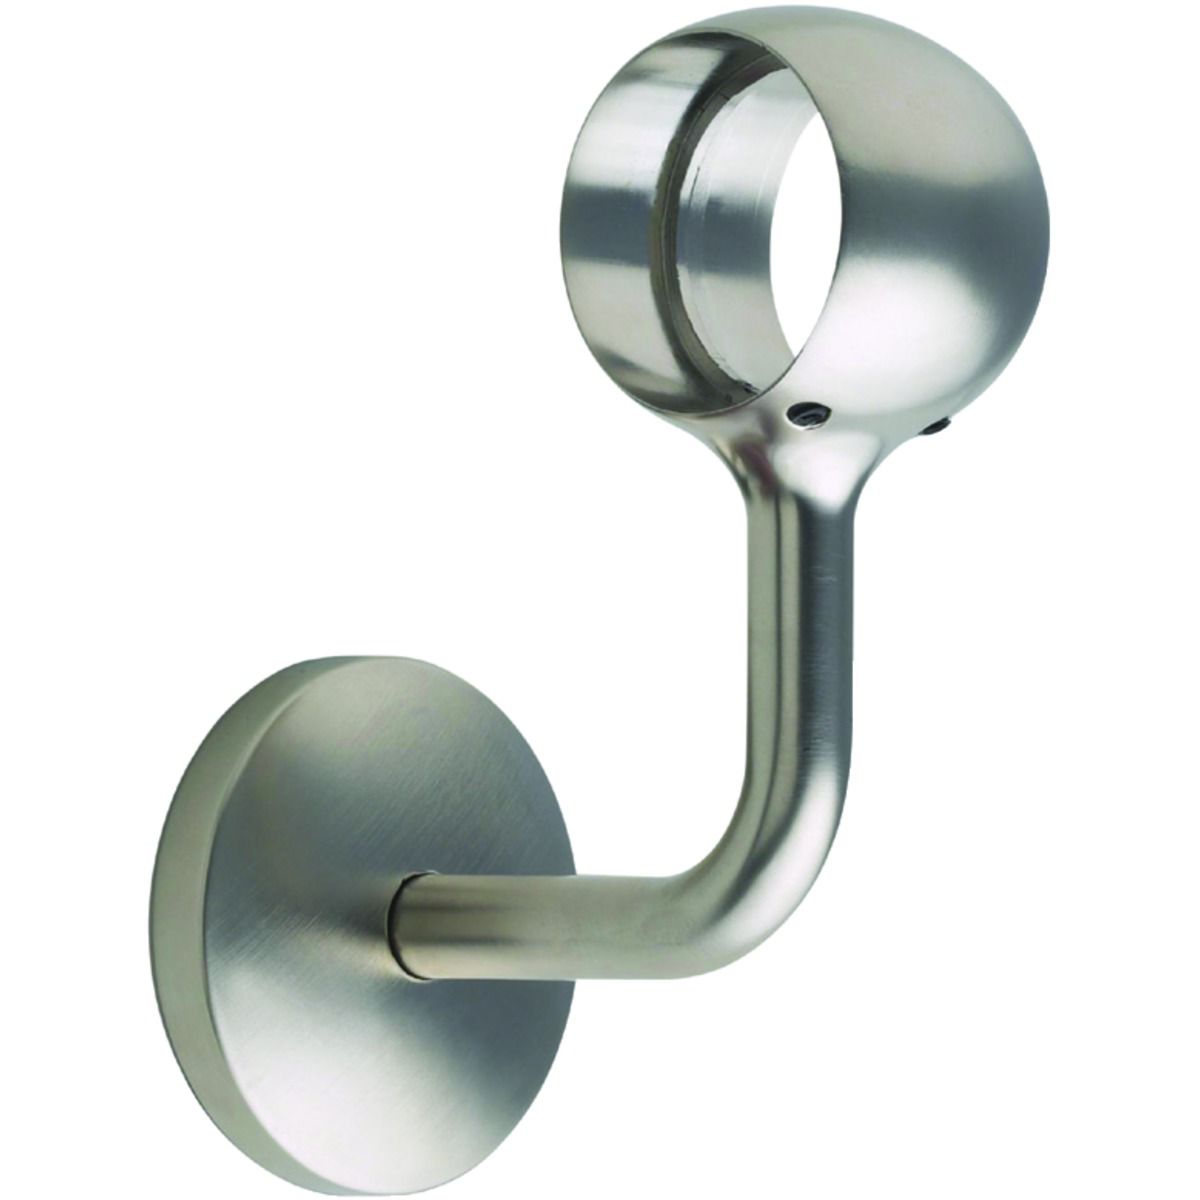 Image of Rothley Handrail Connecting Wall Bracket - Brushed Nickel